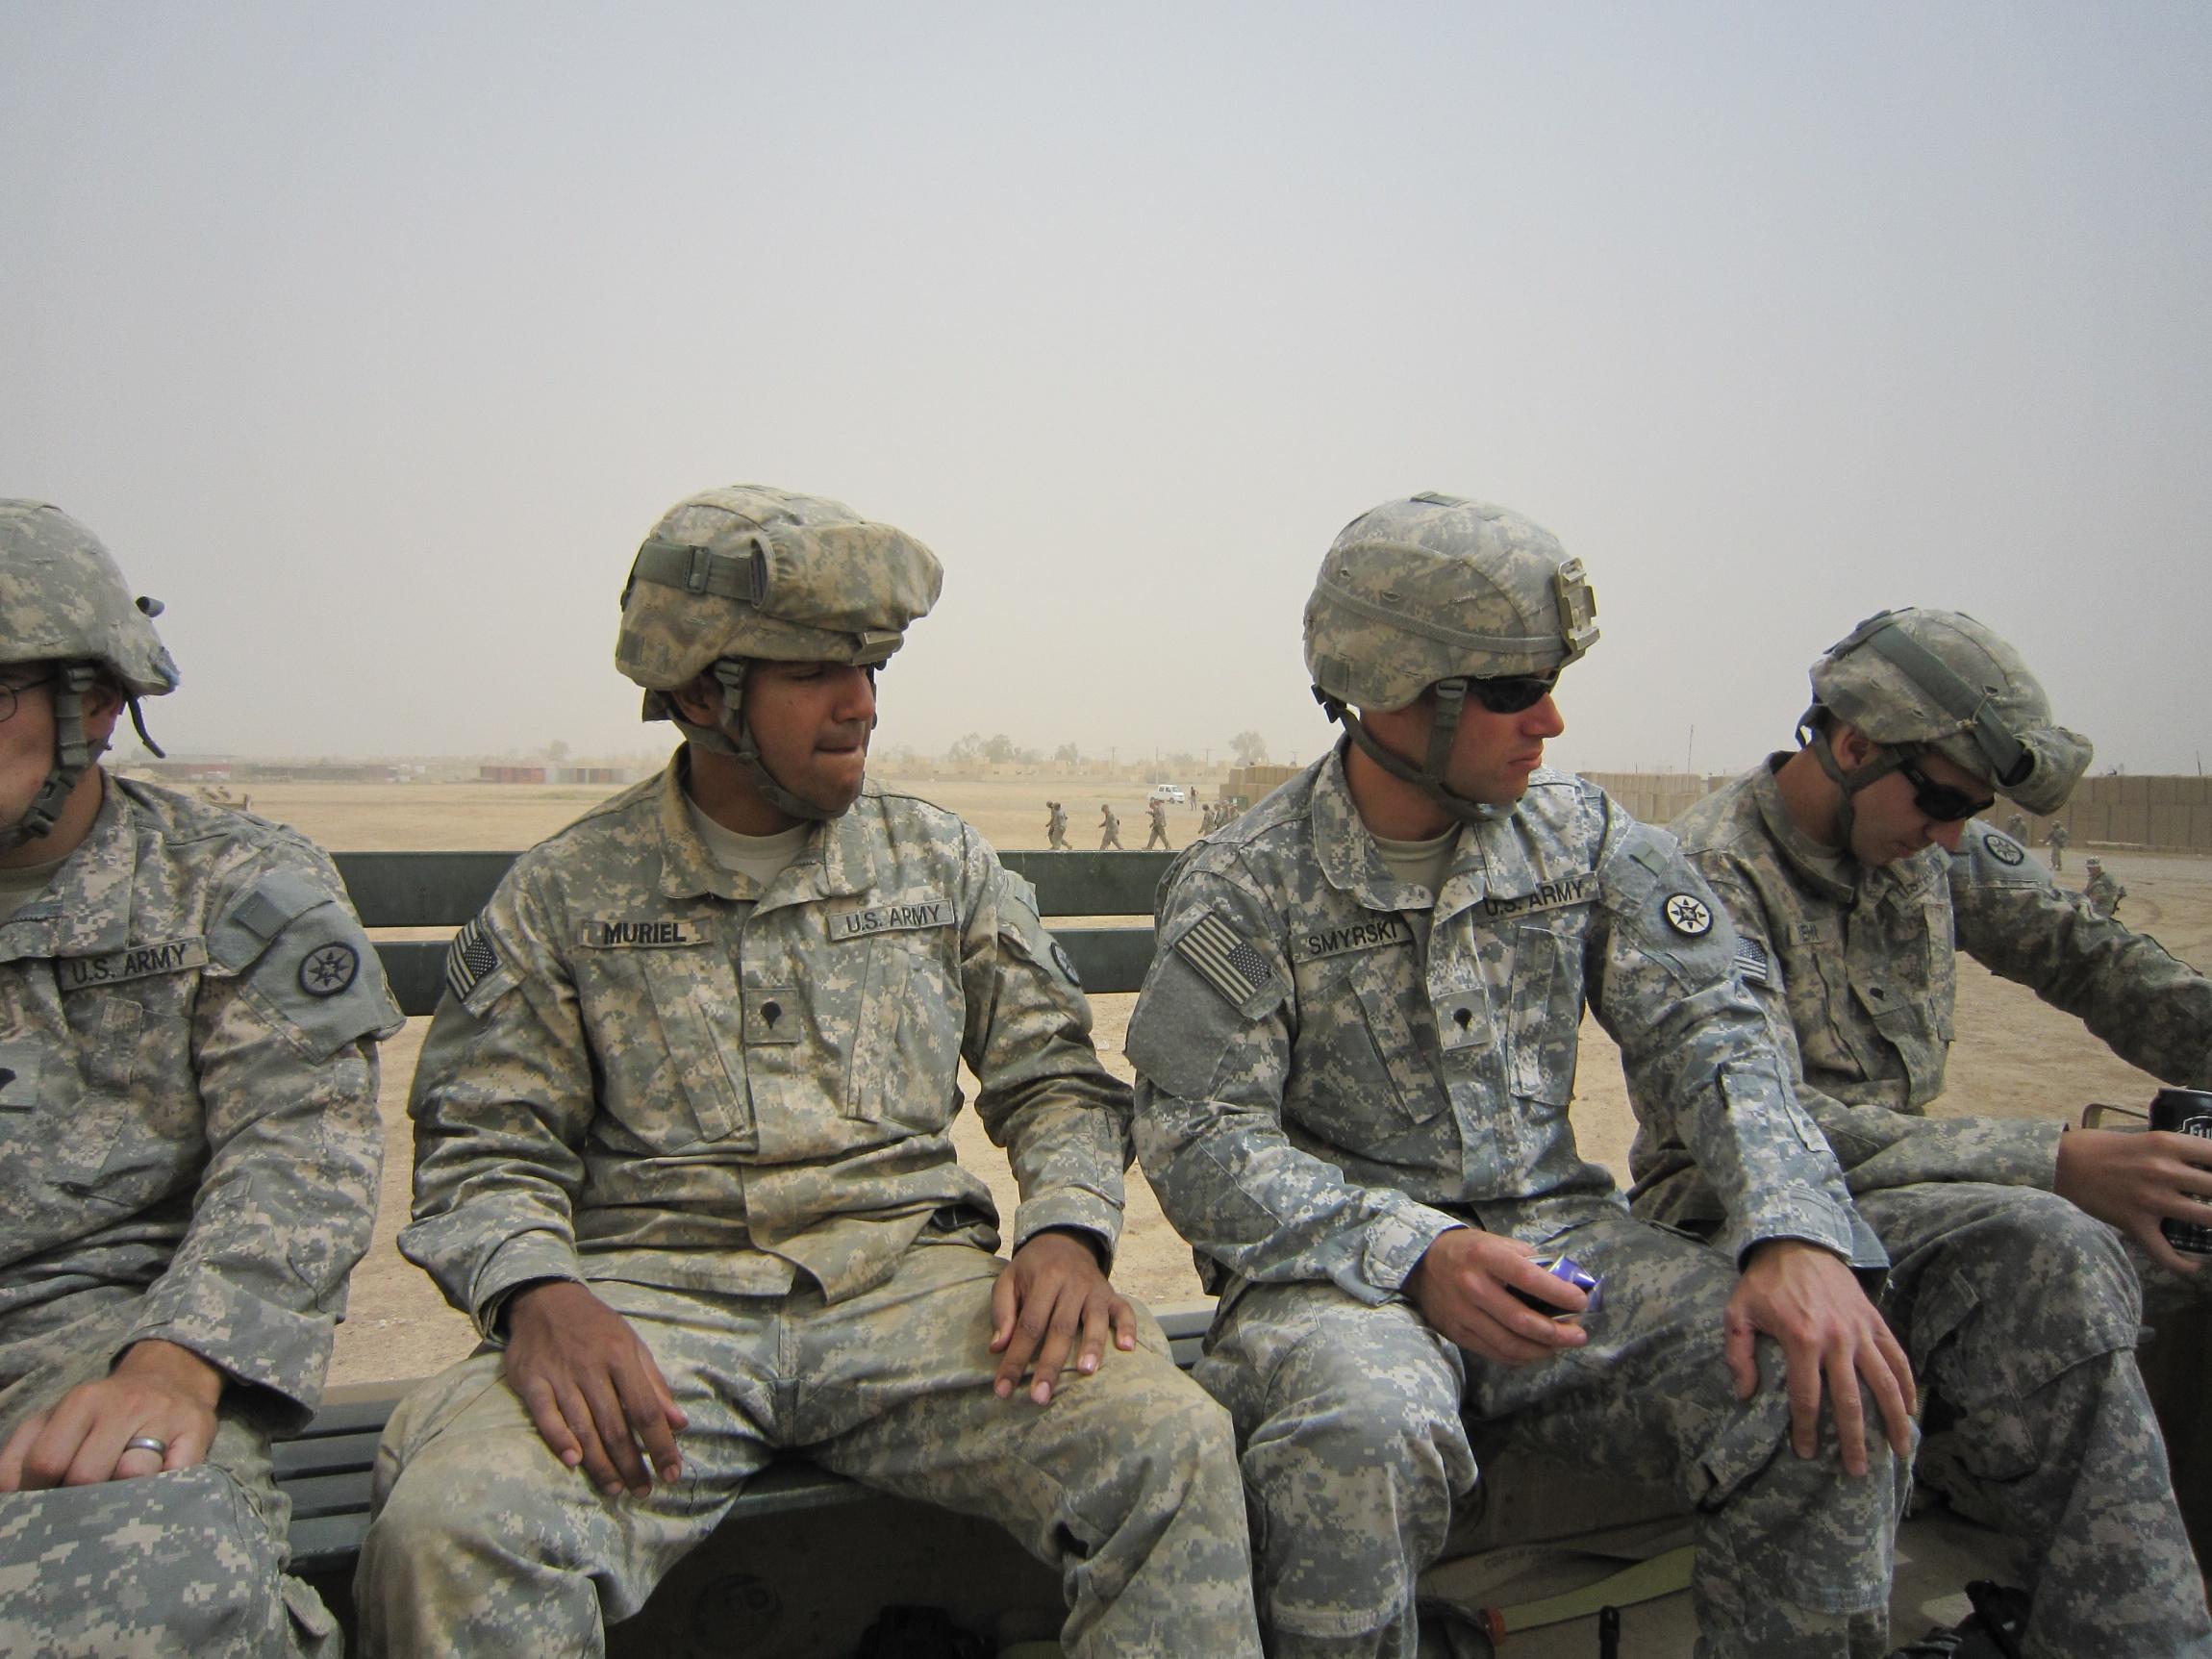 1 in 8 returning soldiers suffers from PTSD